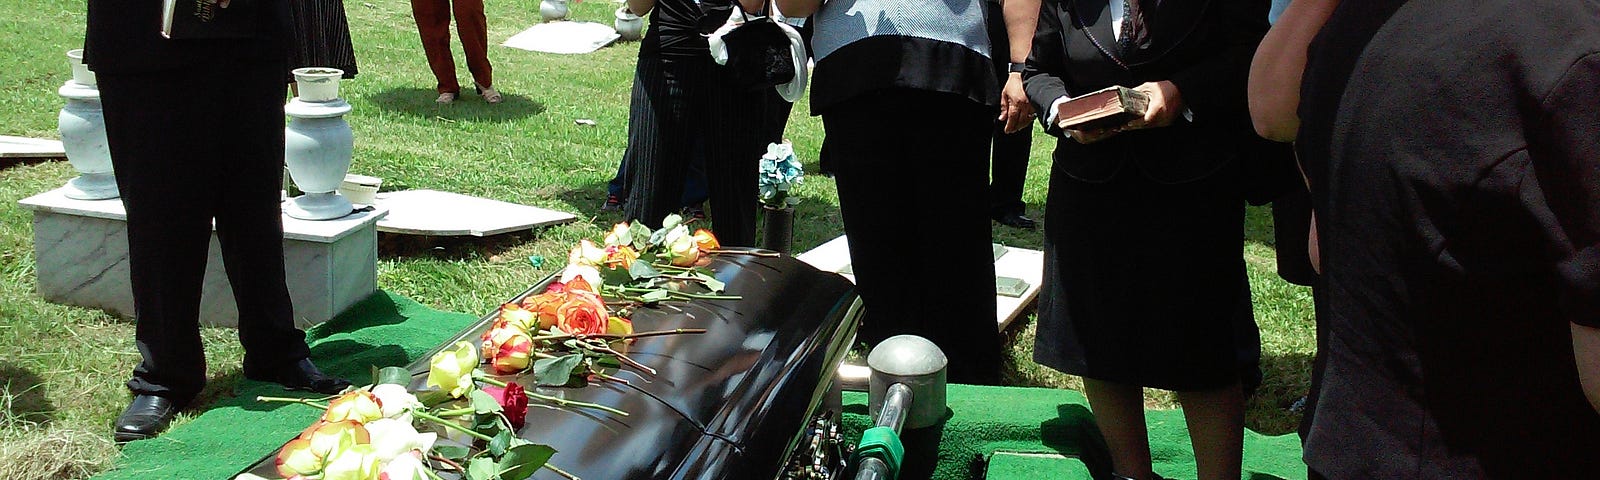 People standing in front of a casket with flowers on it